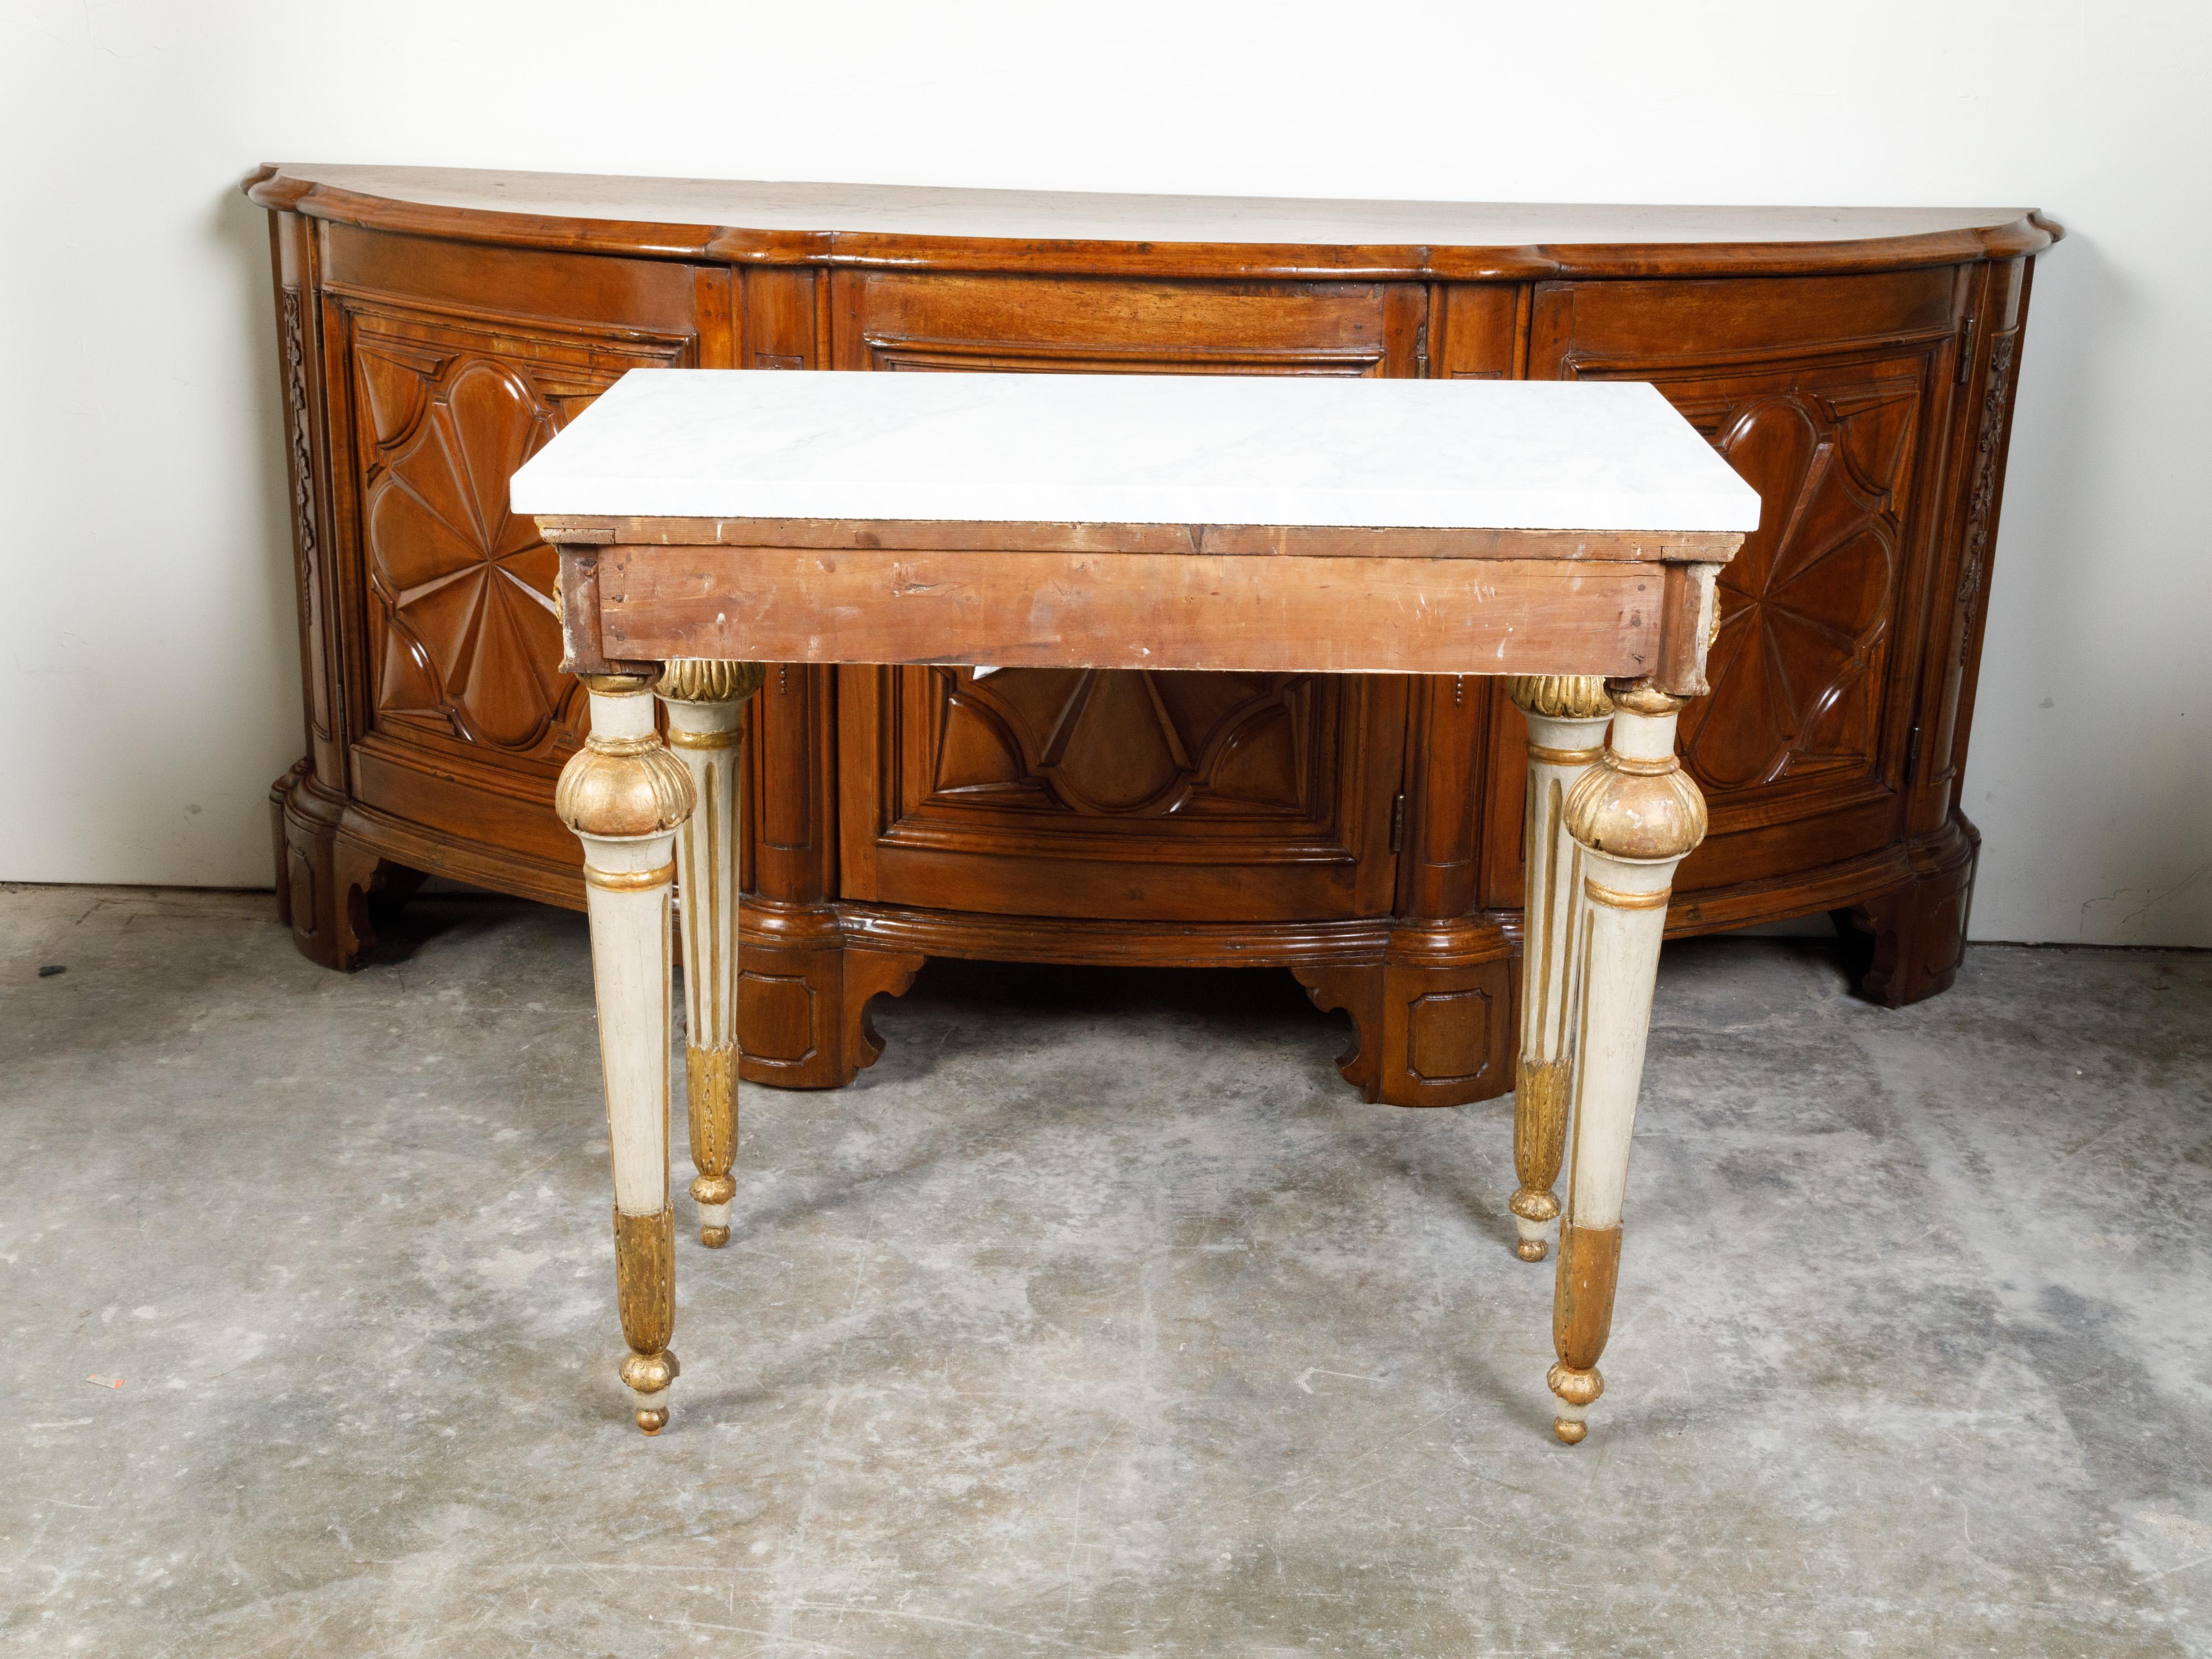 Italian 18th Century Neoclassical Carved and Gilt Console Table with Marble Top For Sale 6